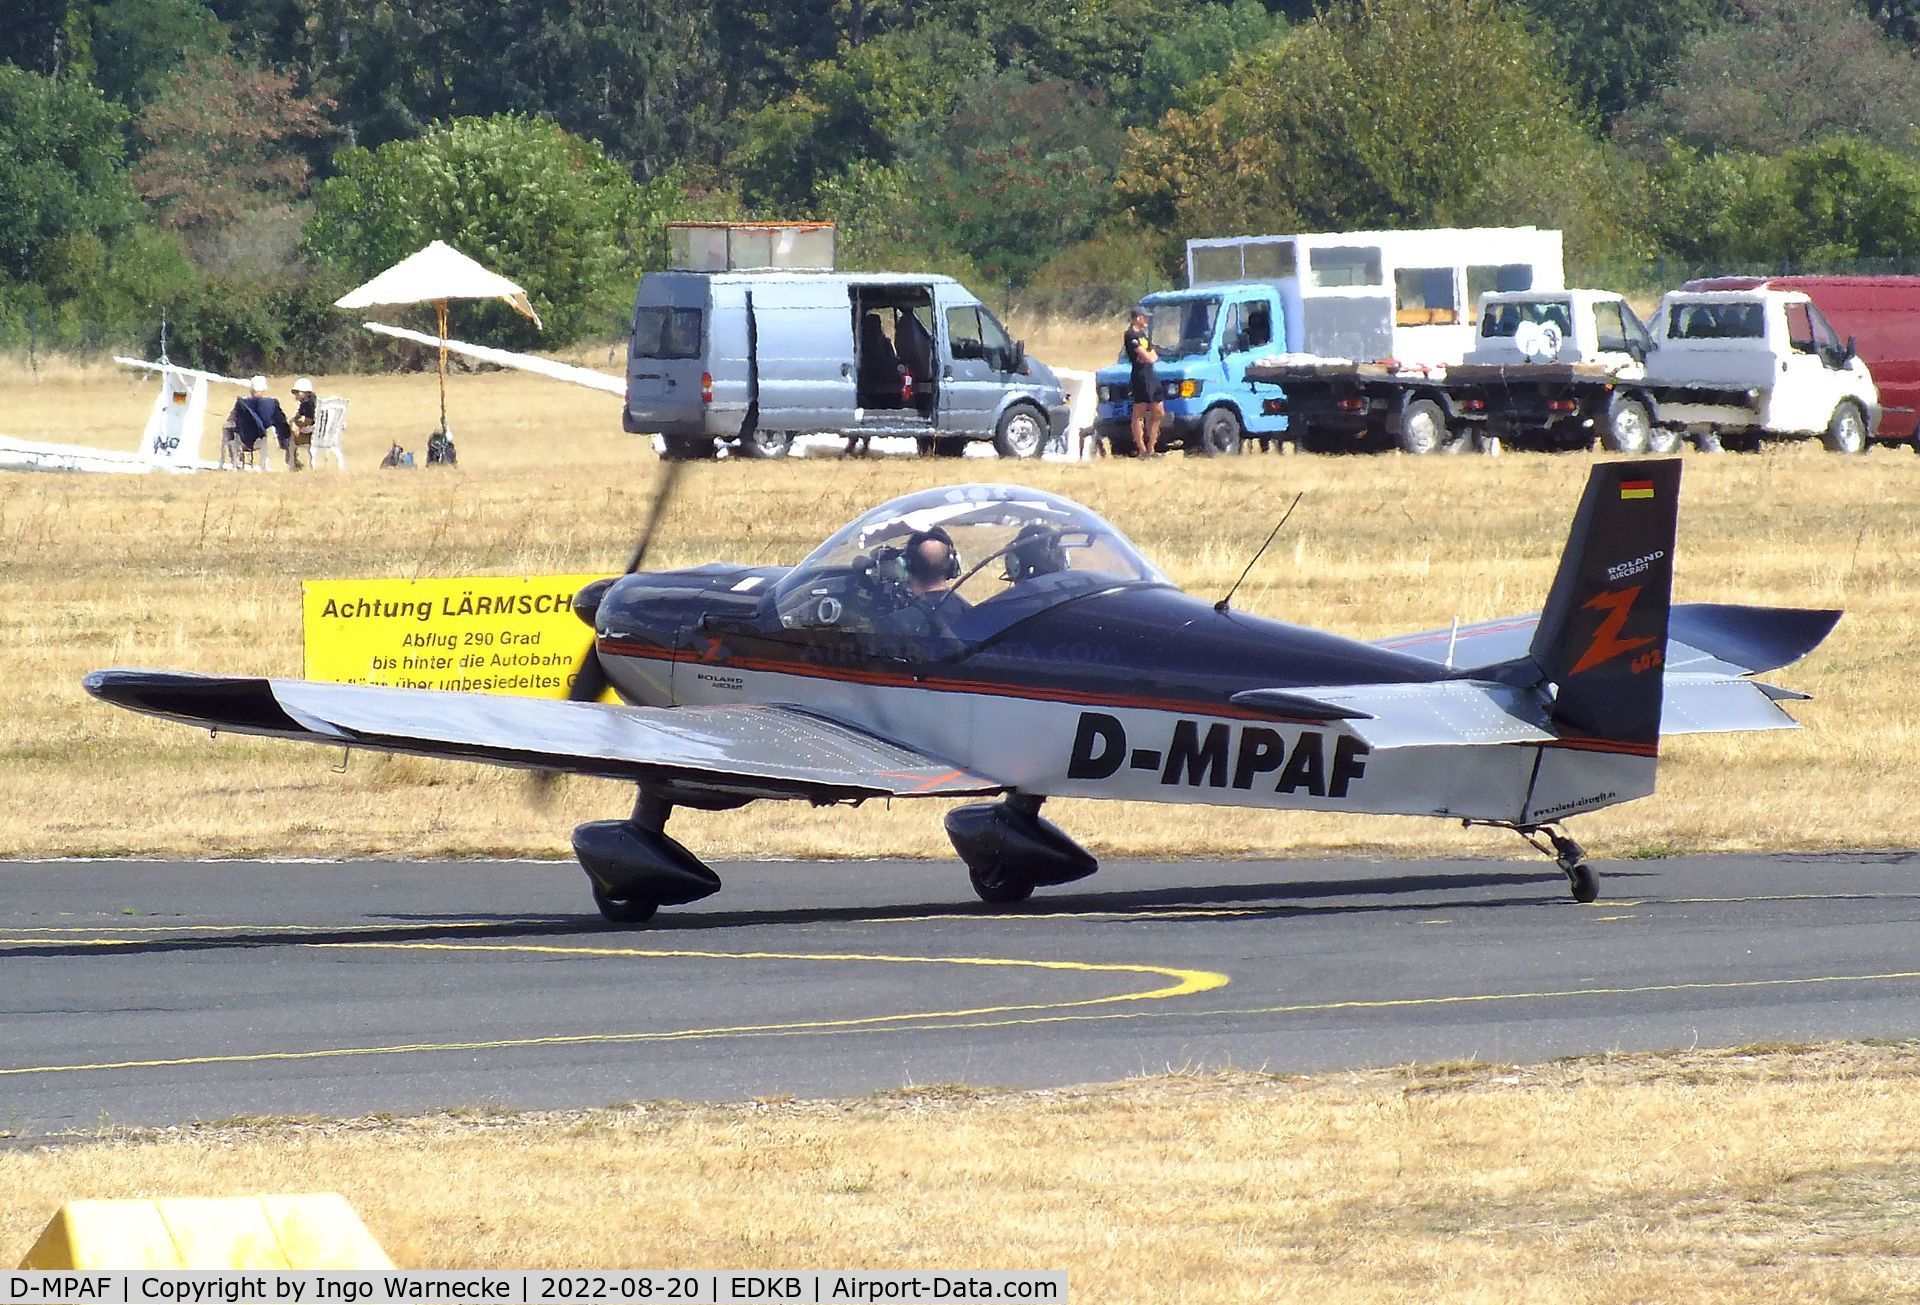 D-MPAF, Roland Z-602 C/N Not found D-MPAF, Roland Z-602 with tailwheel at Bonn-Hangelar airfield during the Grumman Fly-in 2022